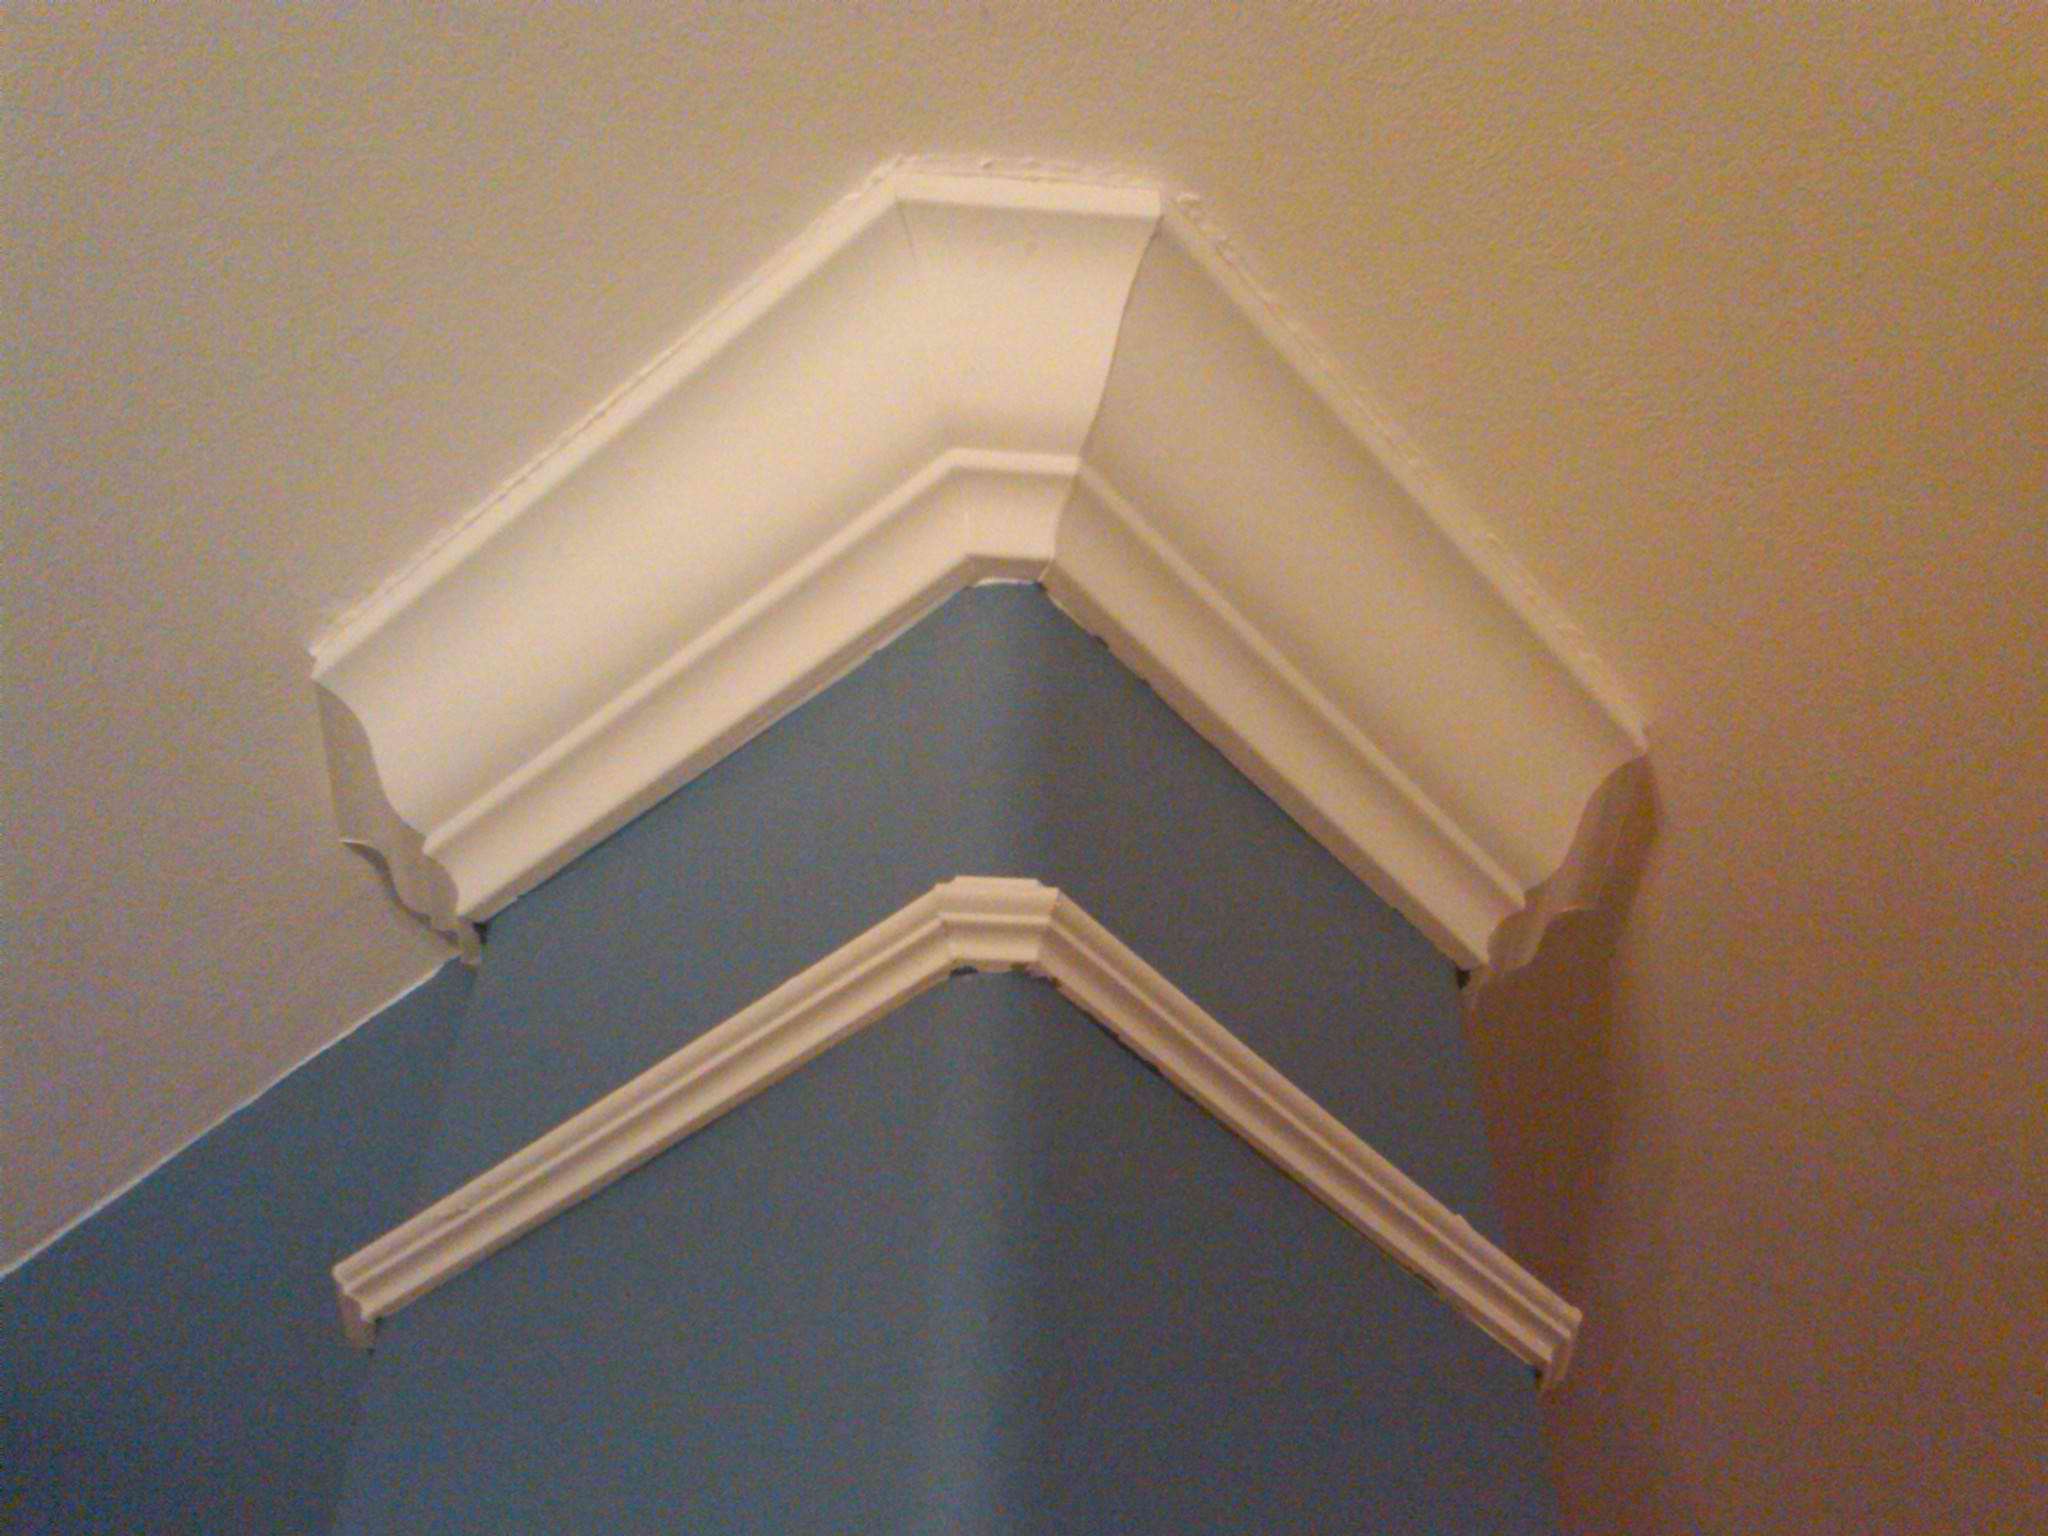 Crown Cornice Molding Rounded Outside Corners HD Wallpaper Source